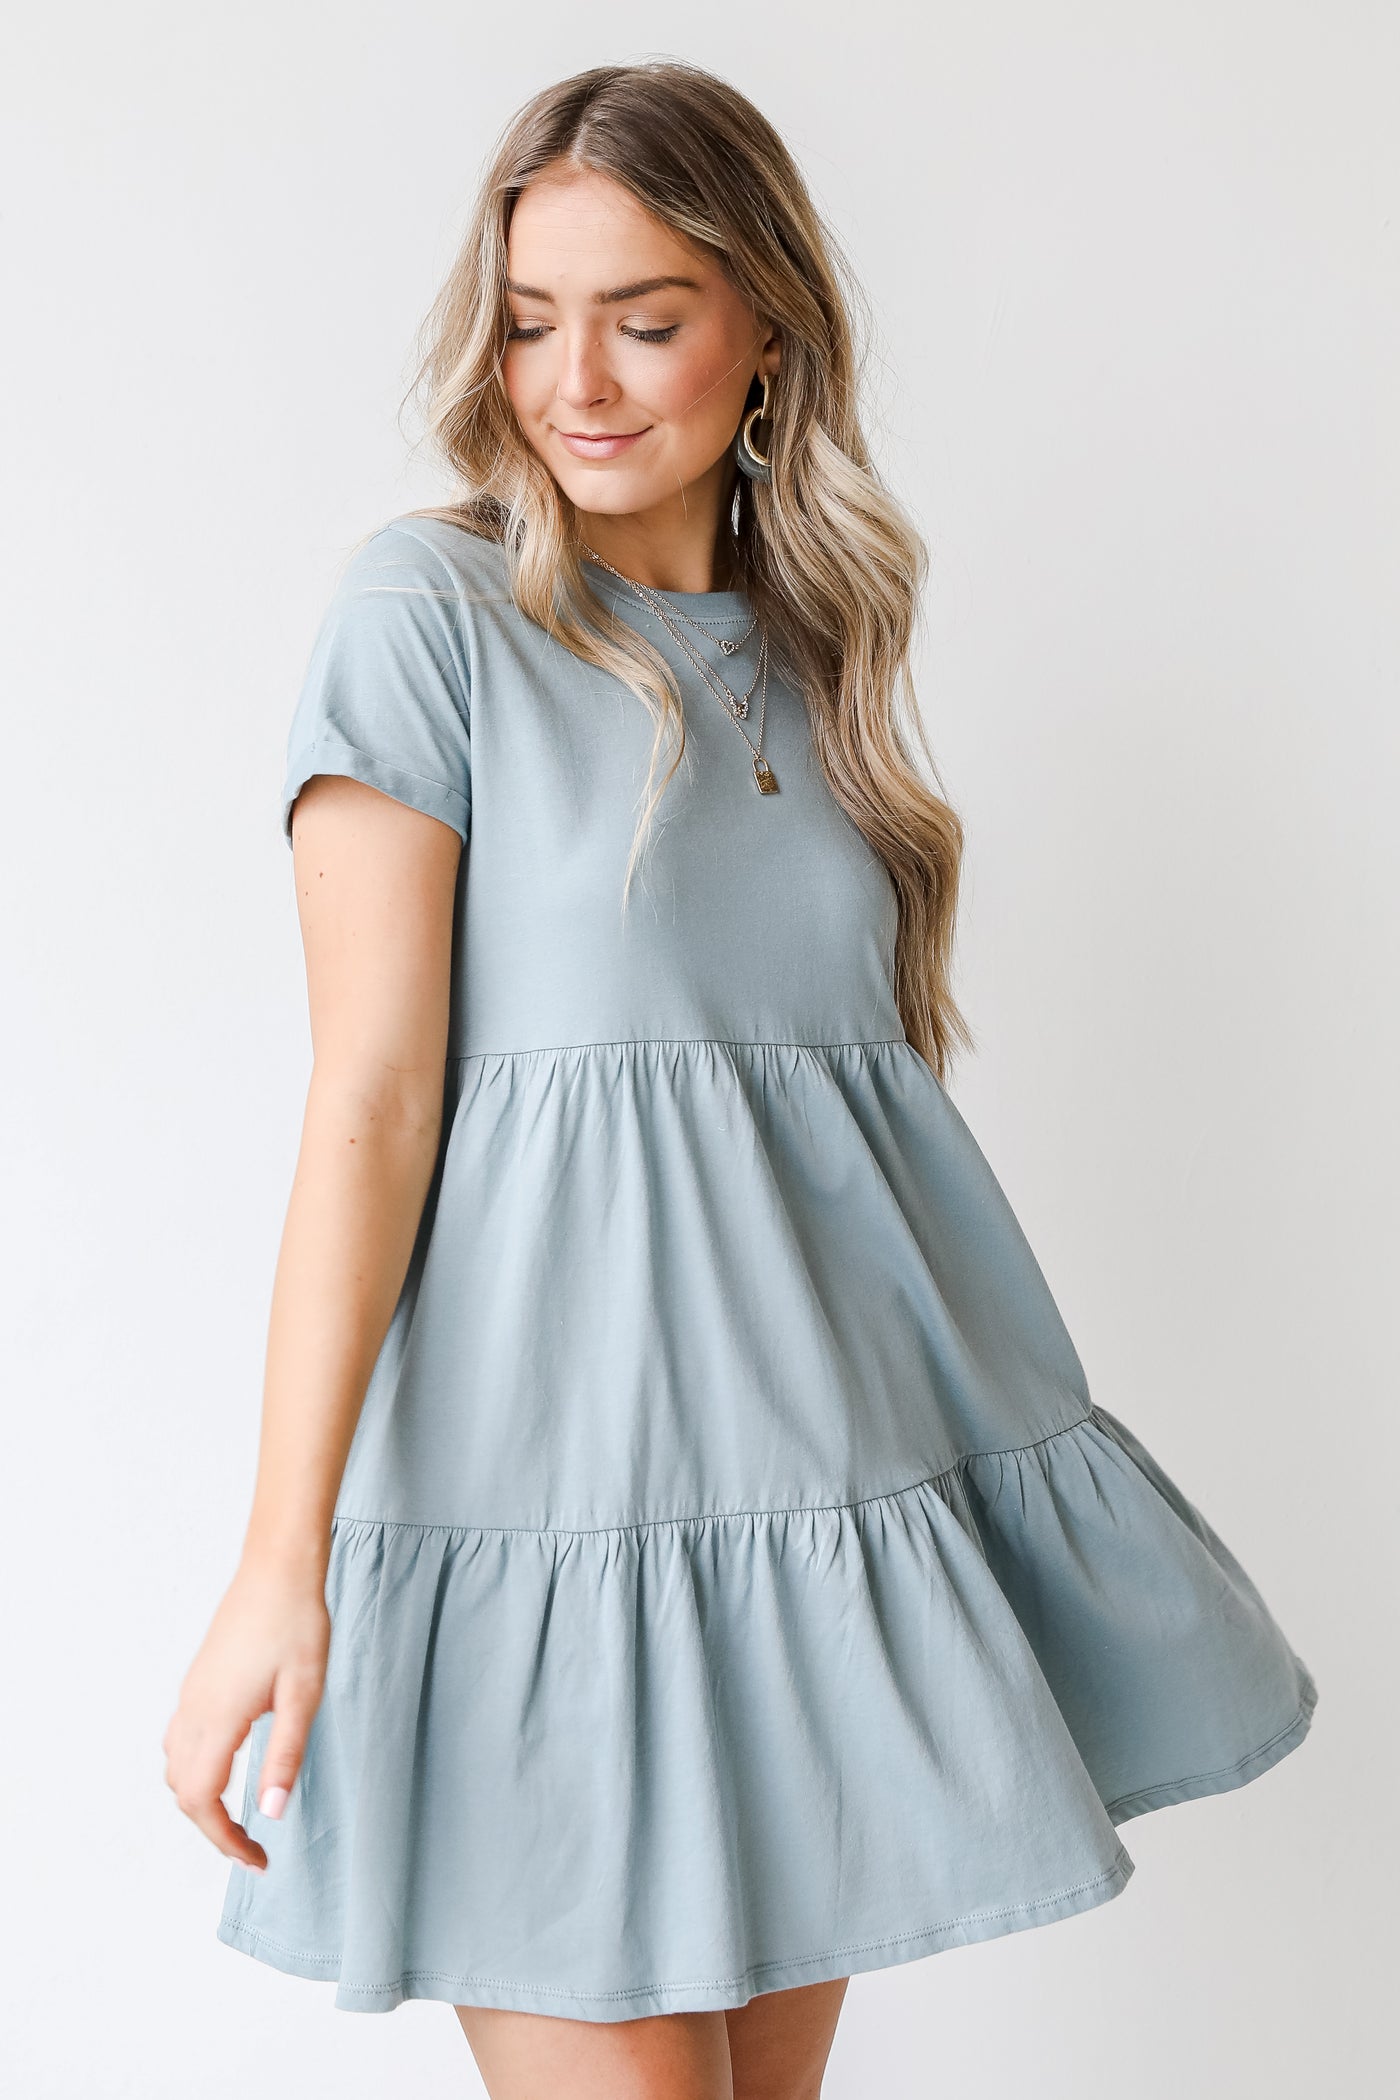 Tiered Babydoll Dress from dress up